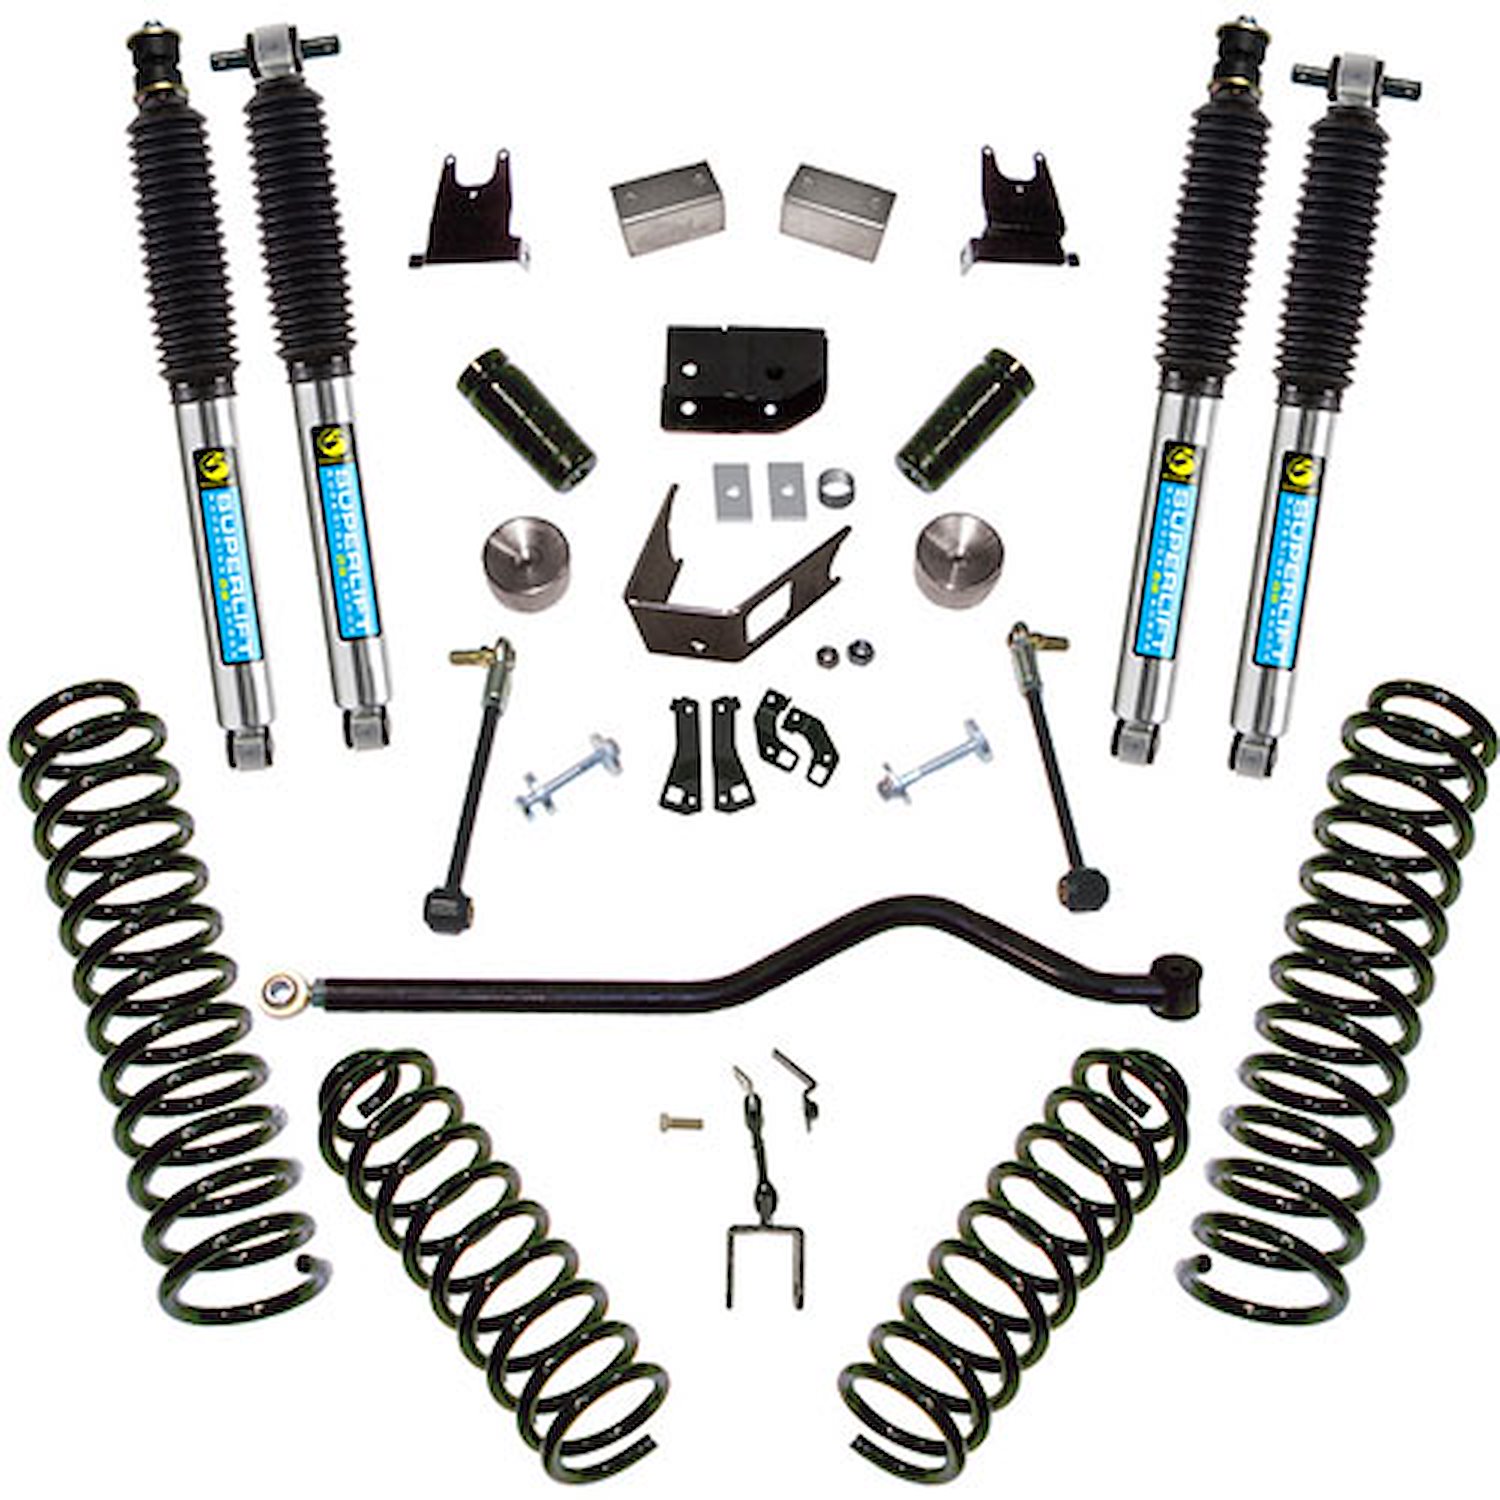 K927B Front and Rear Suspension Lift Kit, Lift Amount: 4 in. Front/4 in. Rear